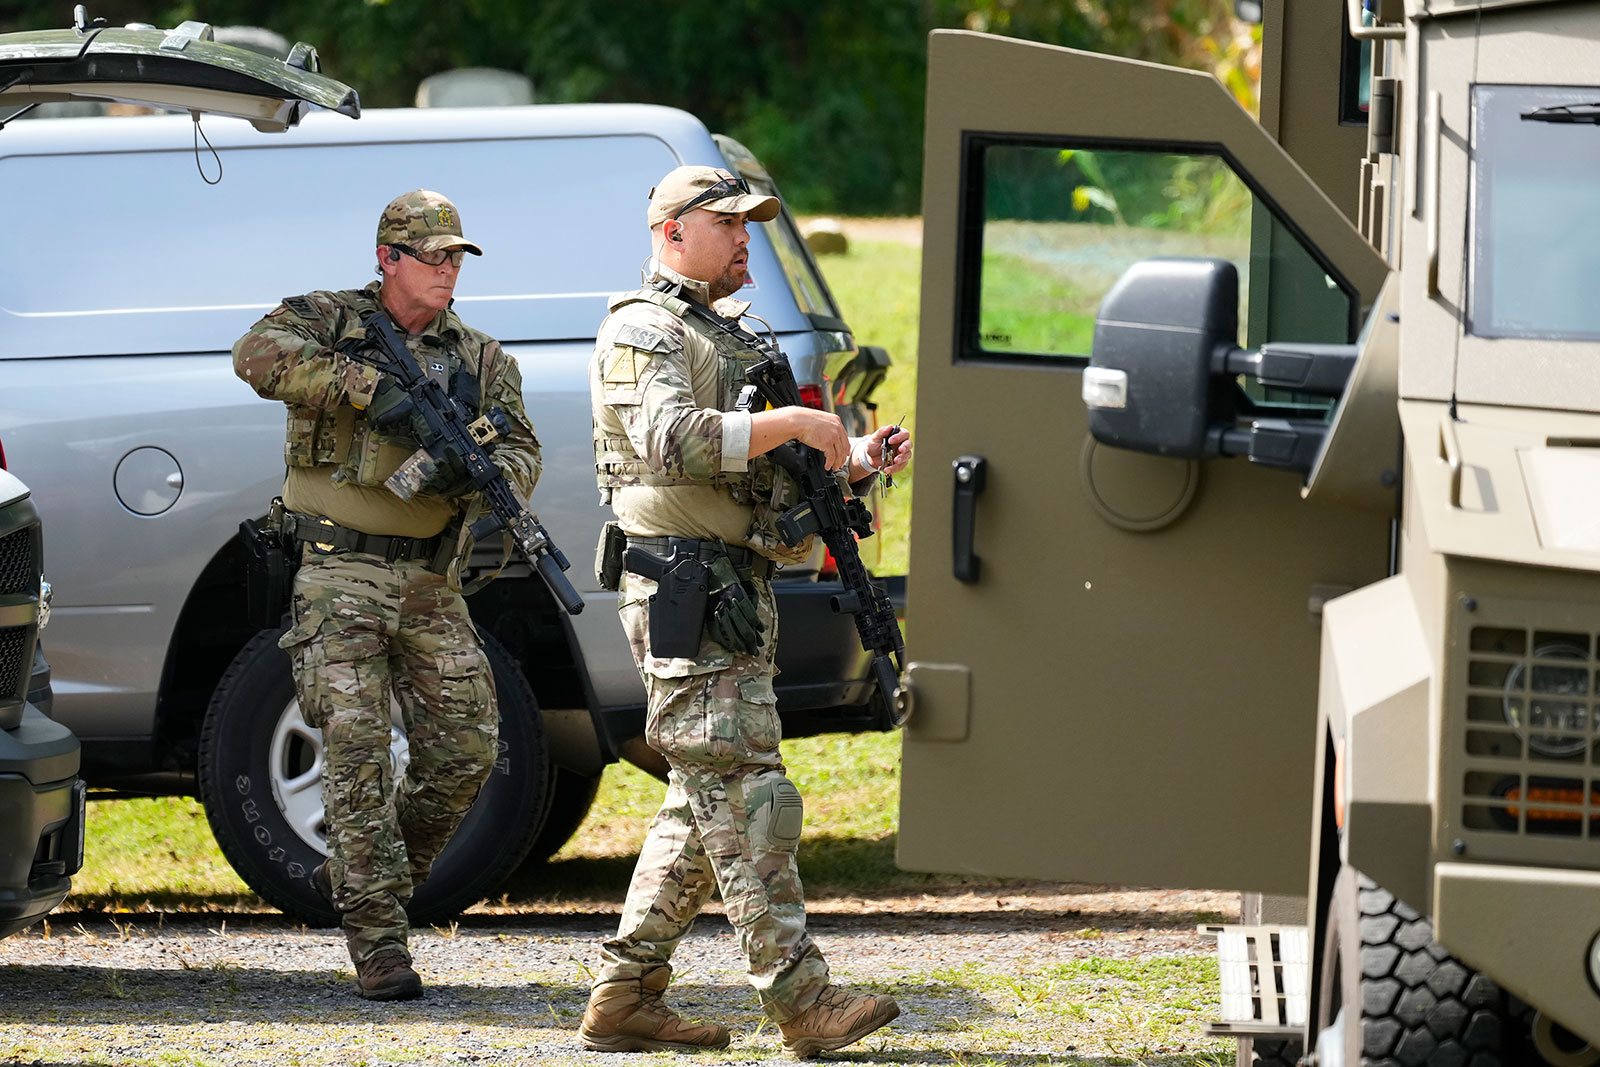 Law enforcement officers gather as they search for escaped convict Danelo Cavalcante in Glenmoore, Pennsylvania, on September 11.